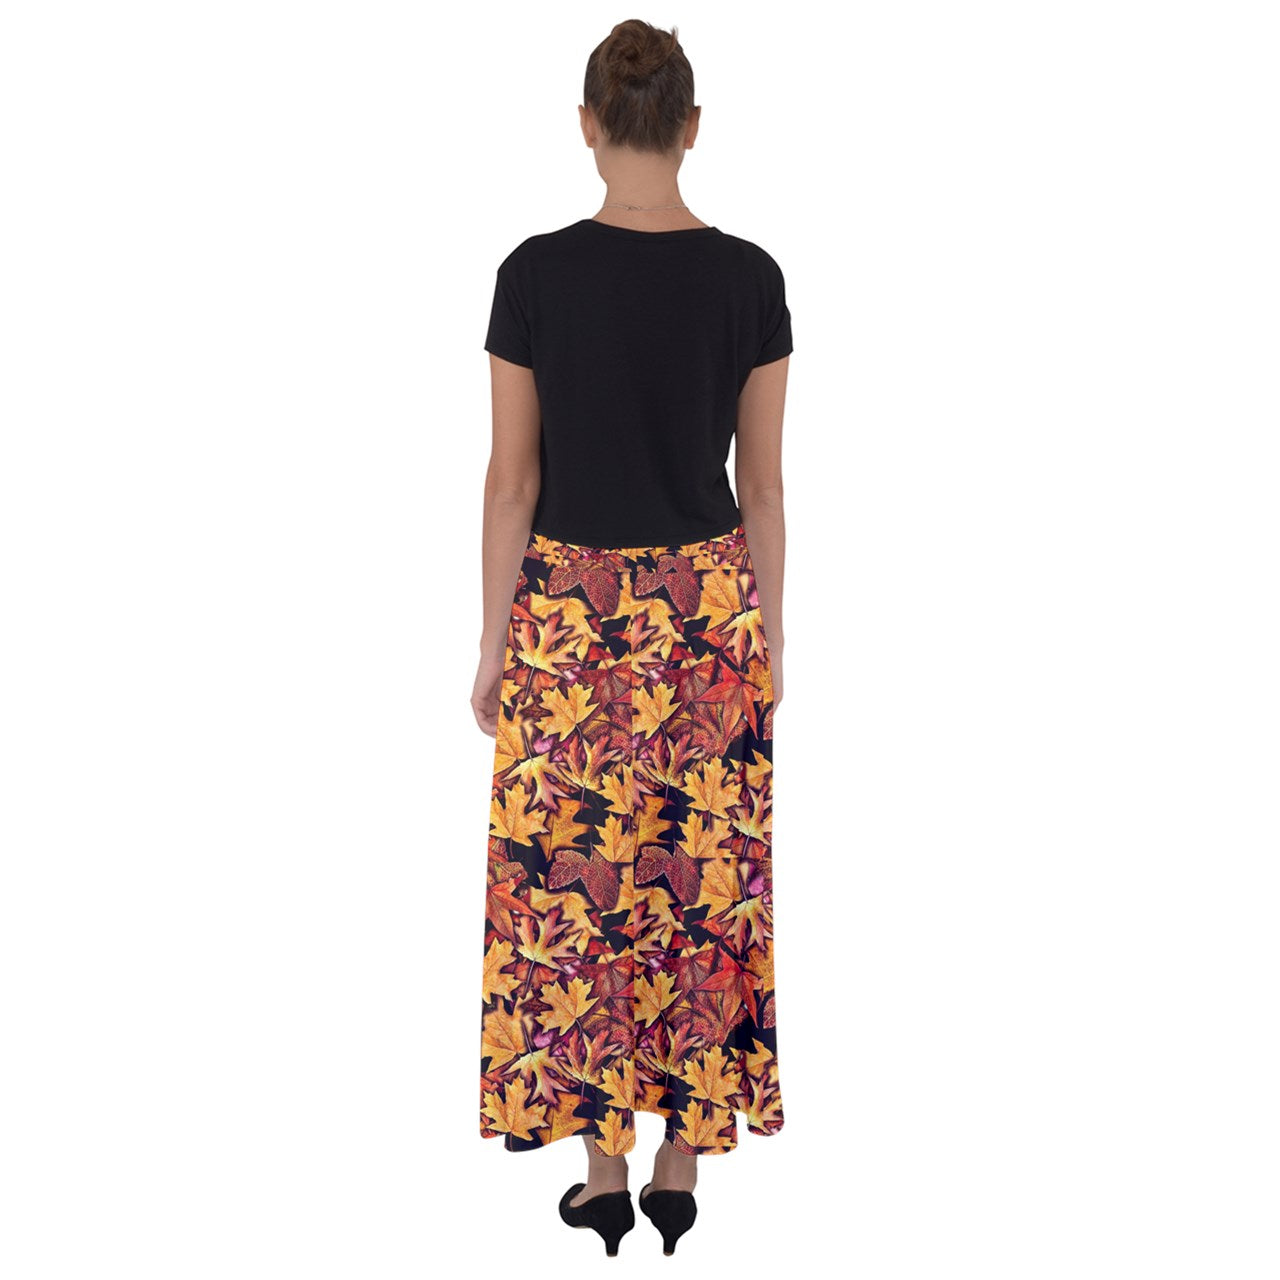 Fall Leaves pattern Flared Maxi Skirt